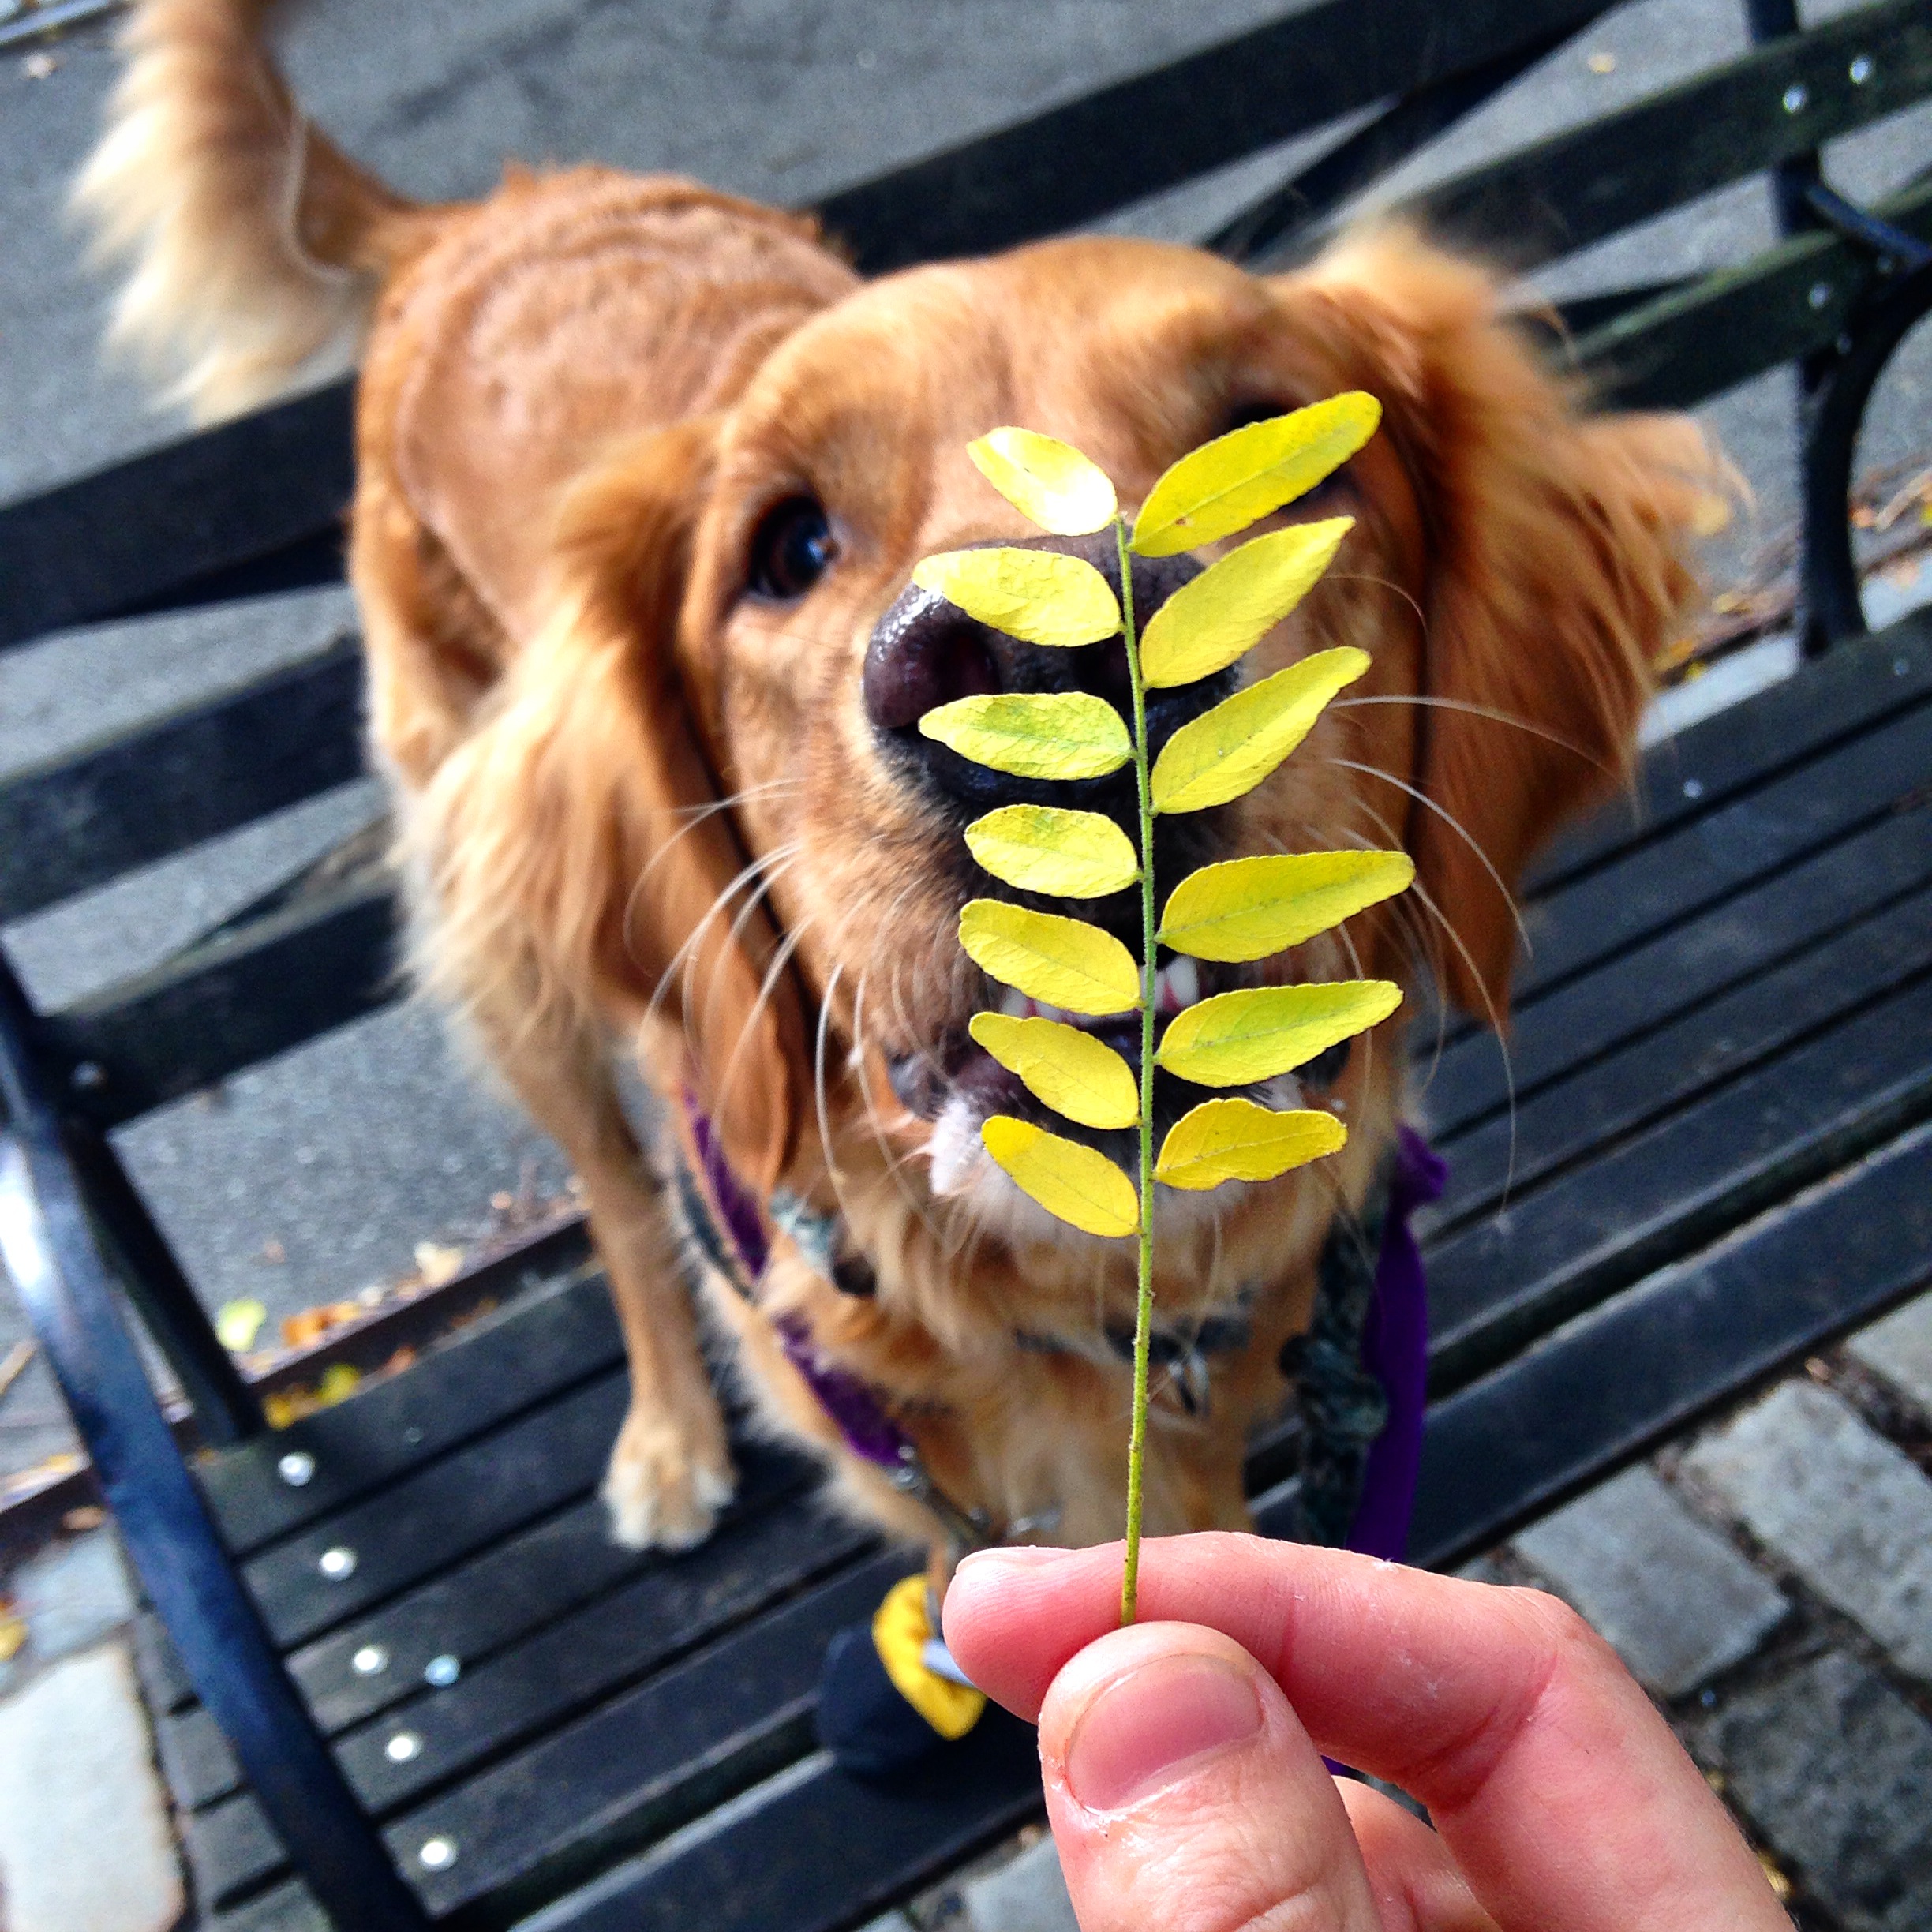 Golden retriever with a yellow autumn leaf